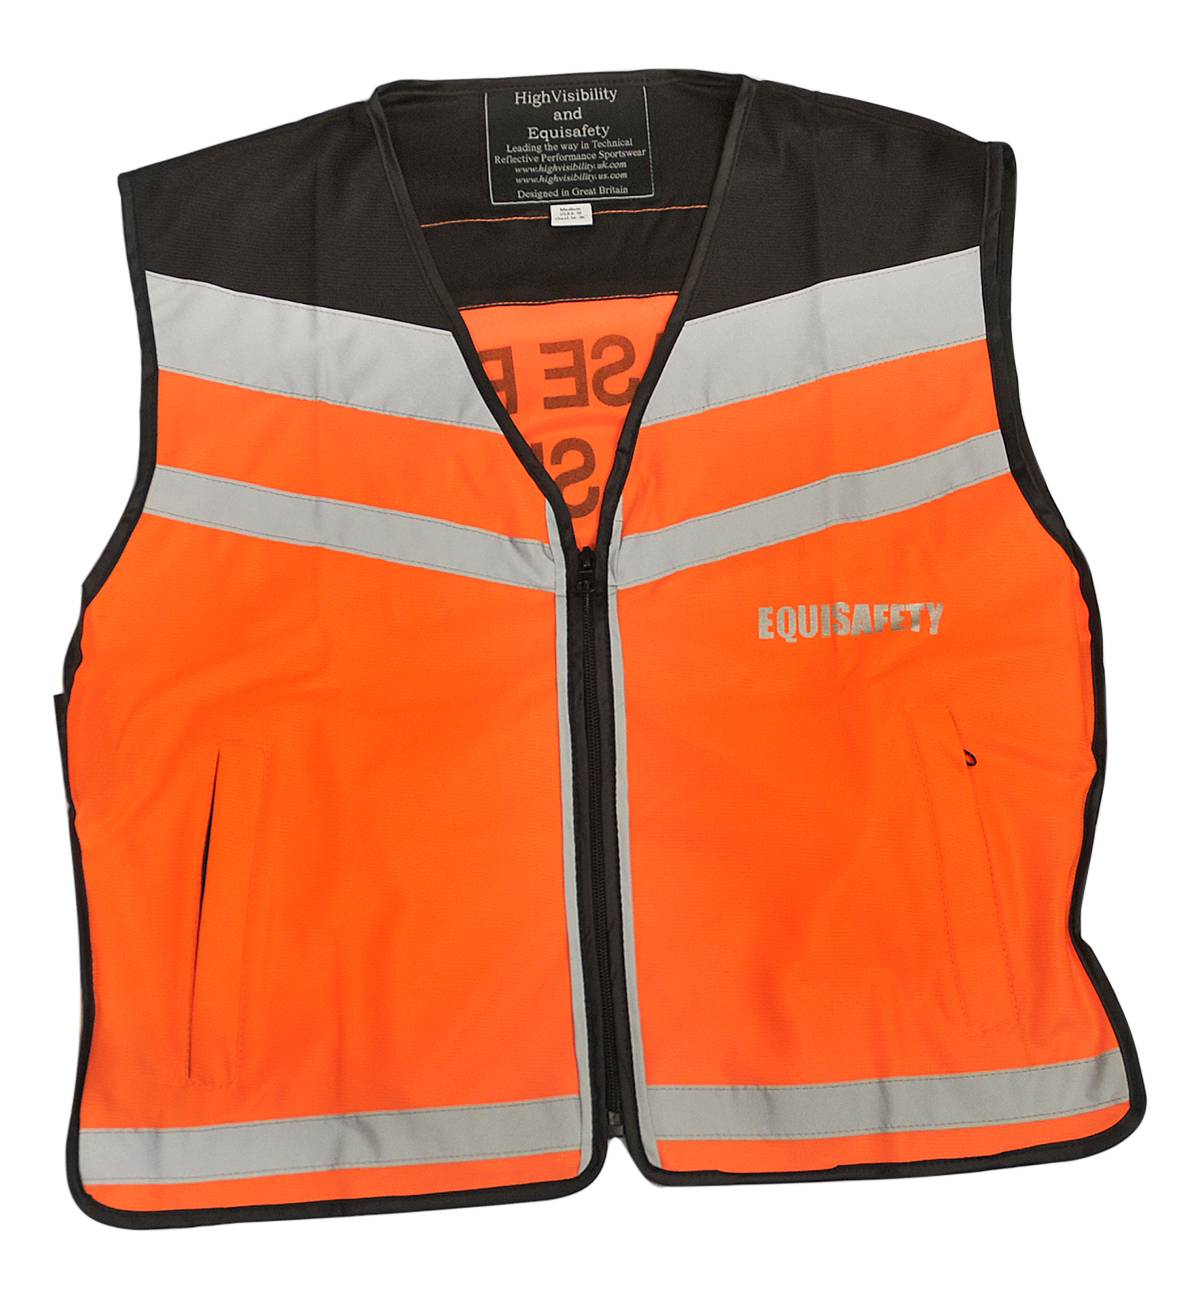 Equisafety Air " PLEASE PASS WIDE & SLOWLY" High Viz Waistcoat Yellow or pink. 